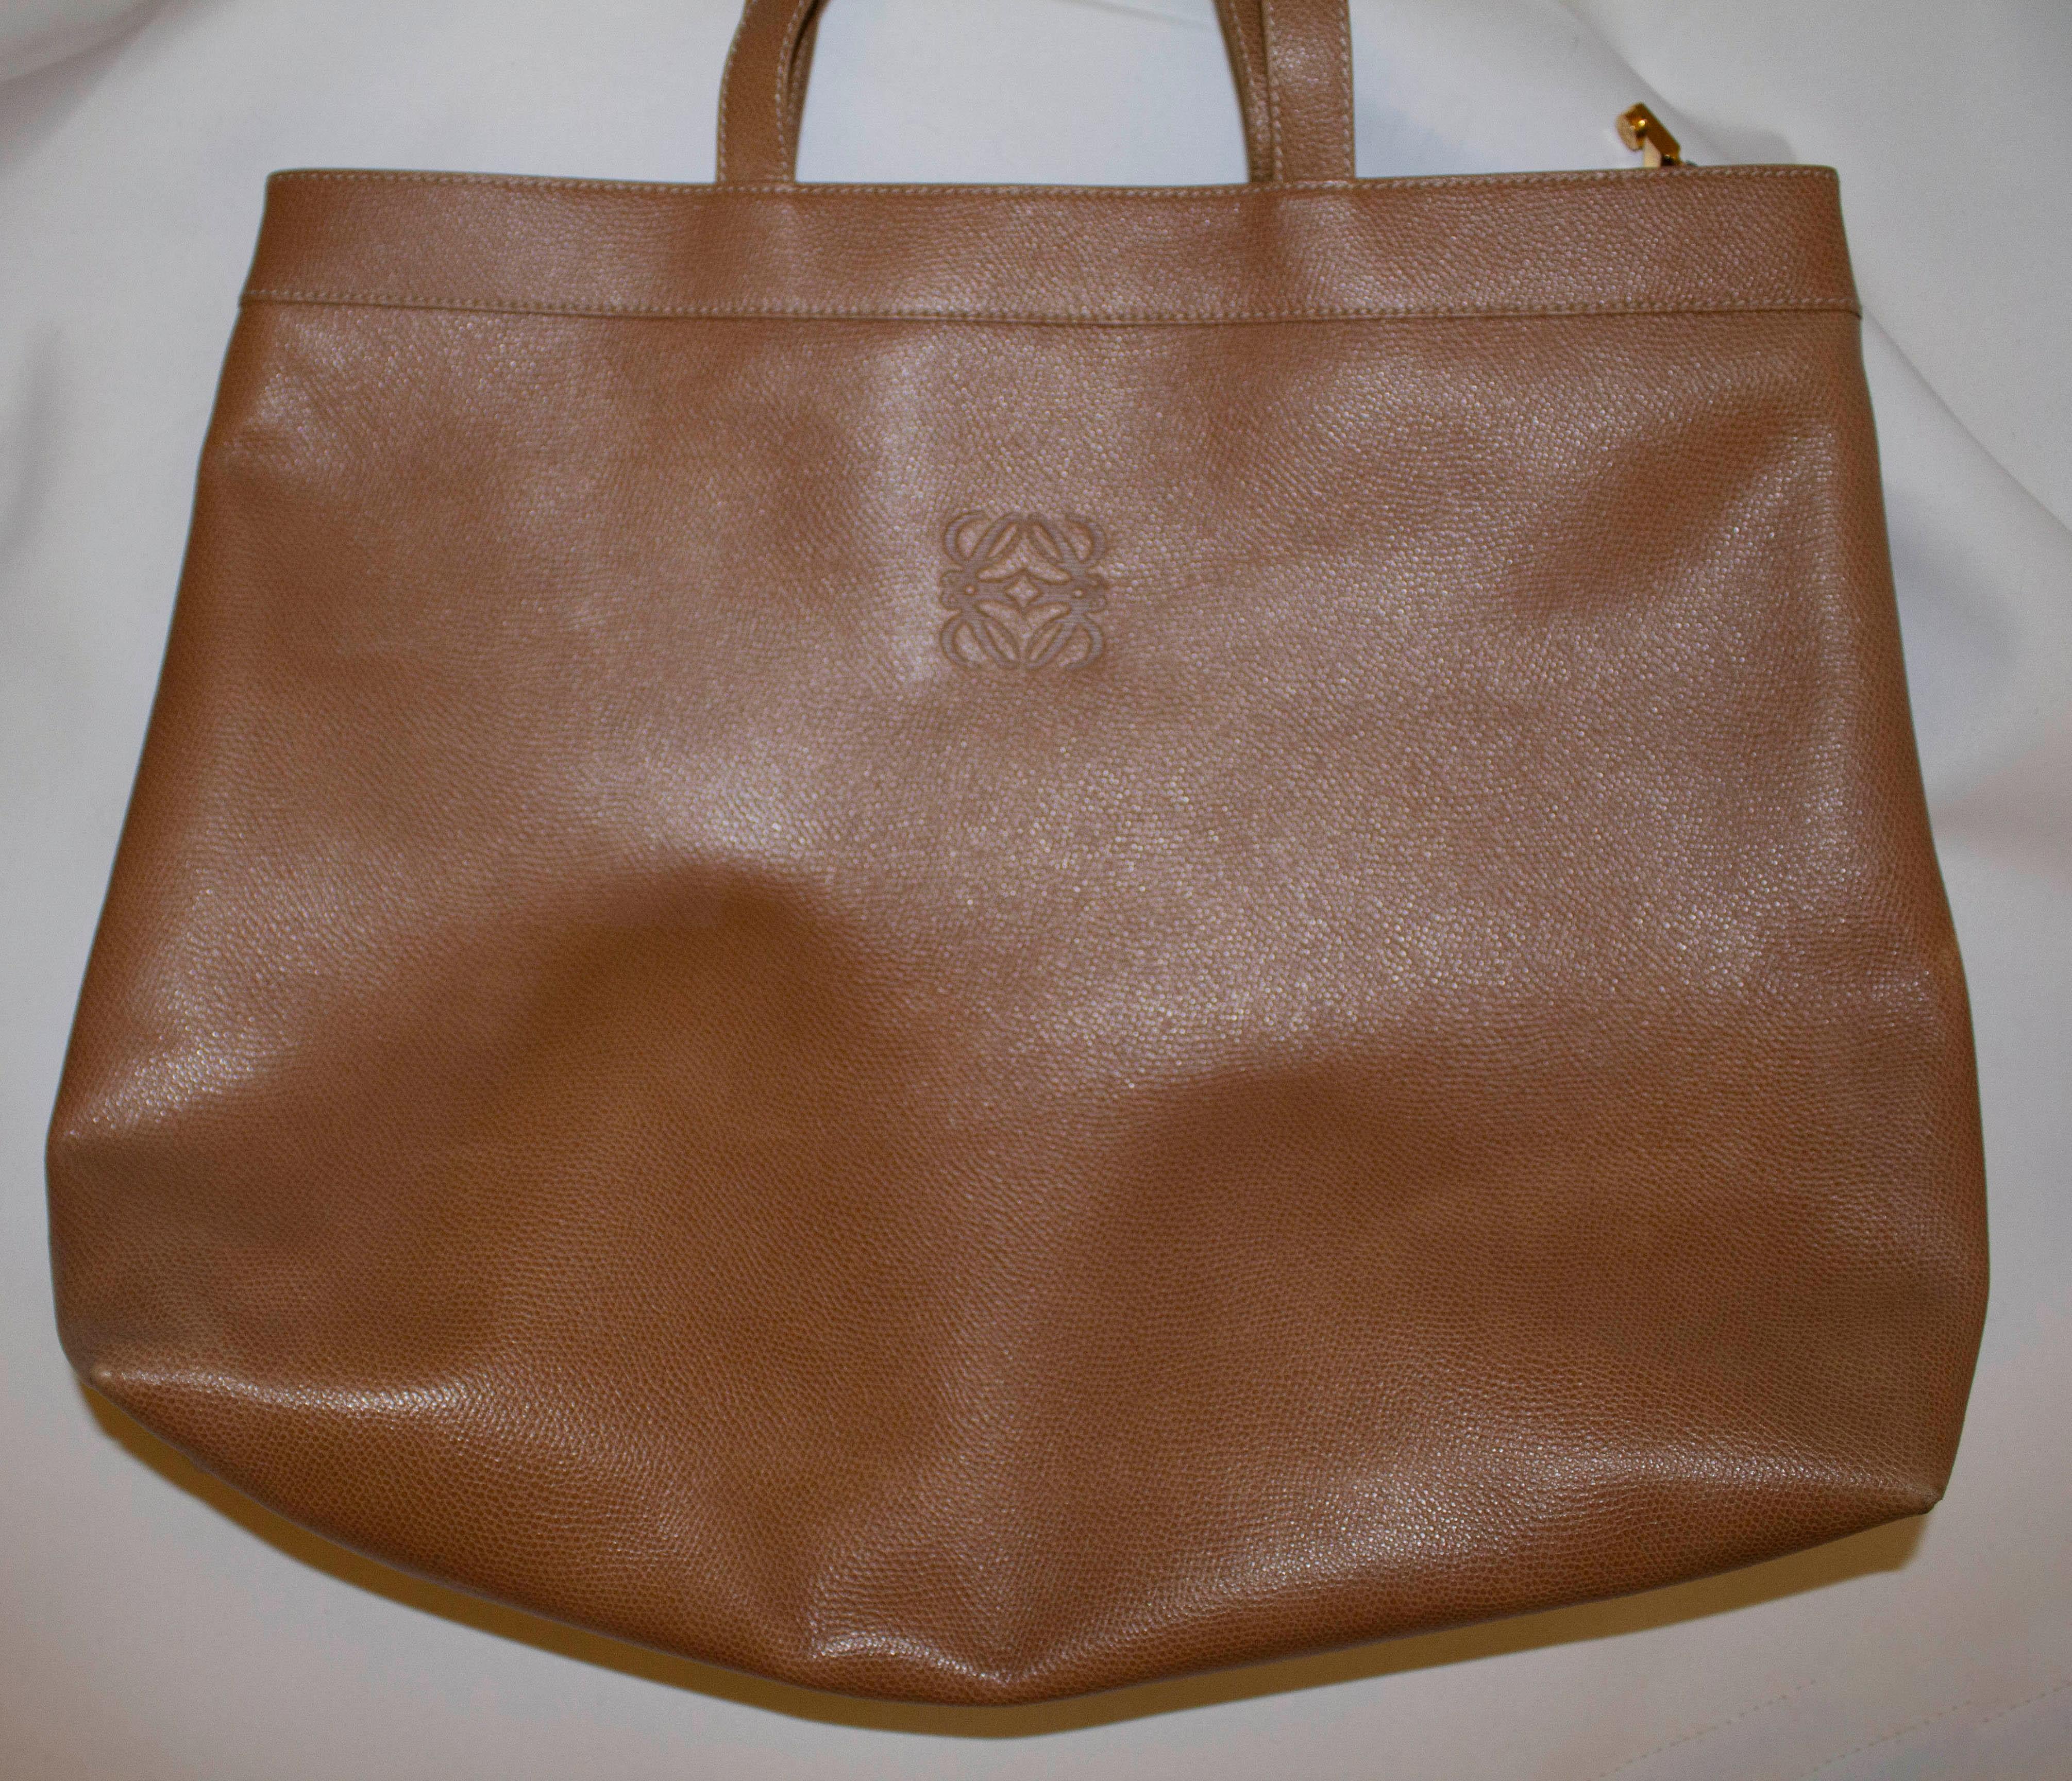 Loewe Tan Leather Tote Bag In Good Condition For Sale In London, GB